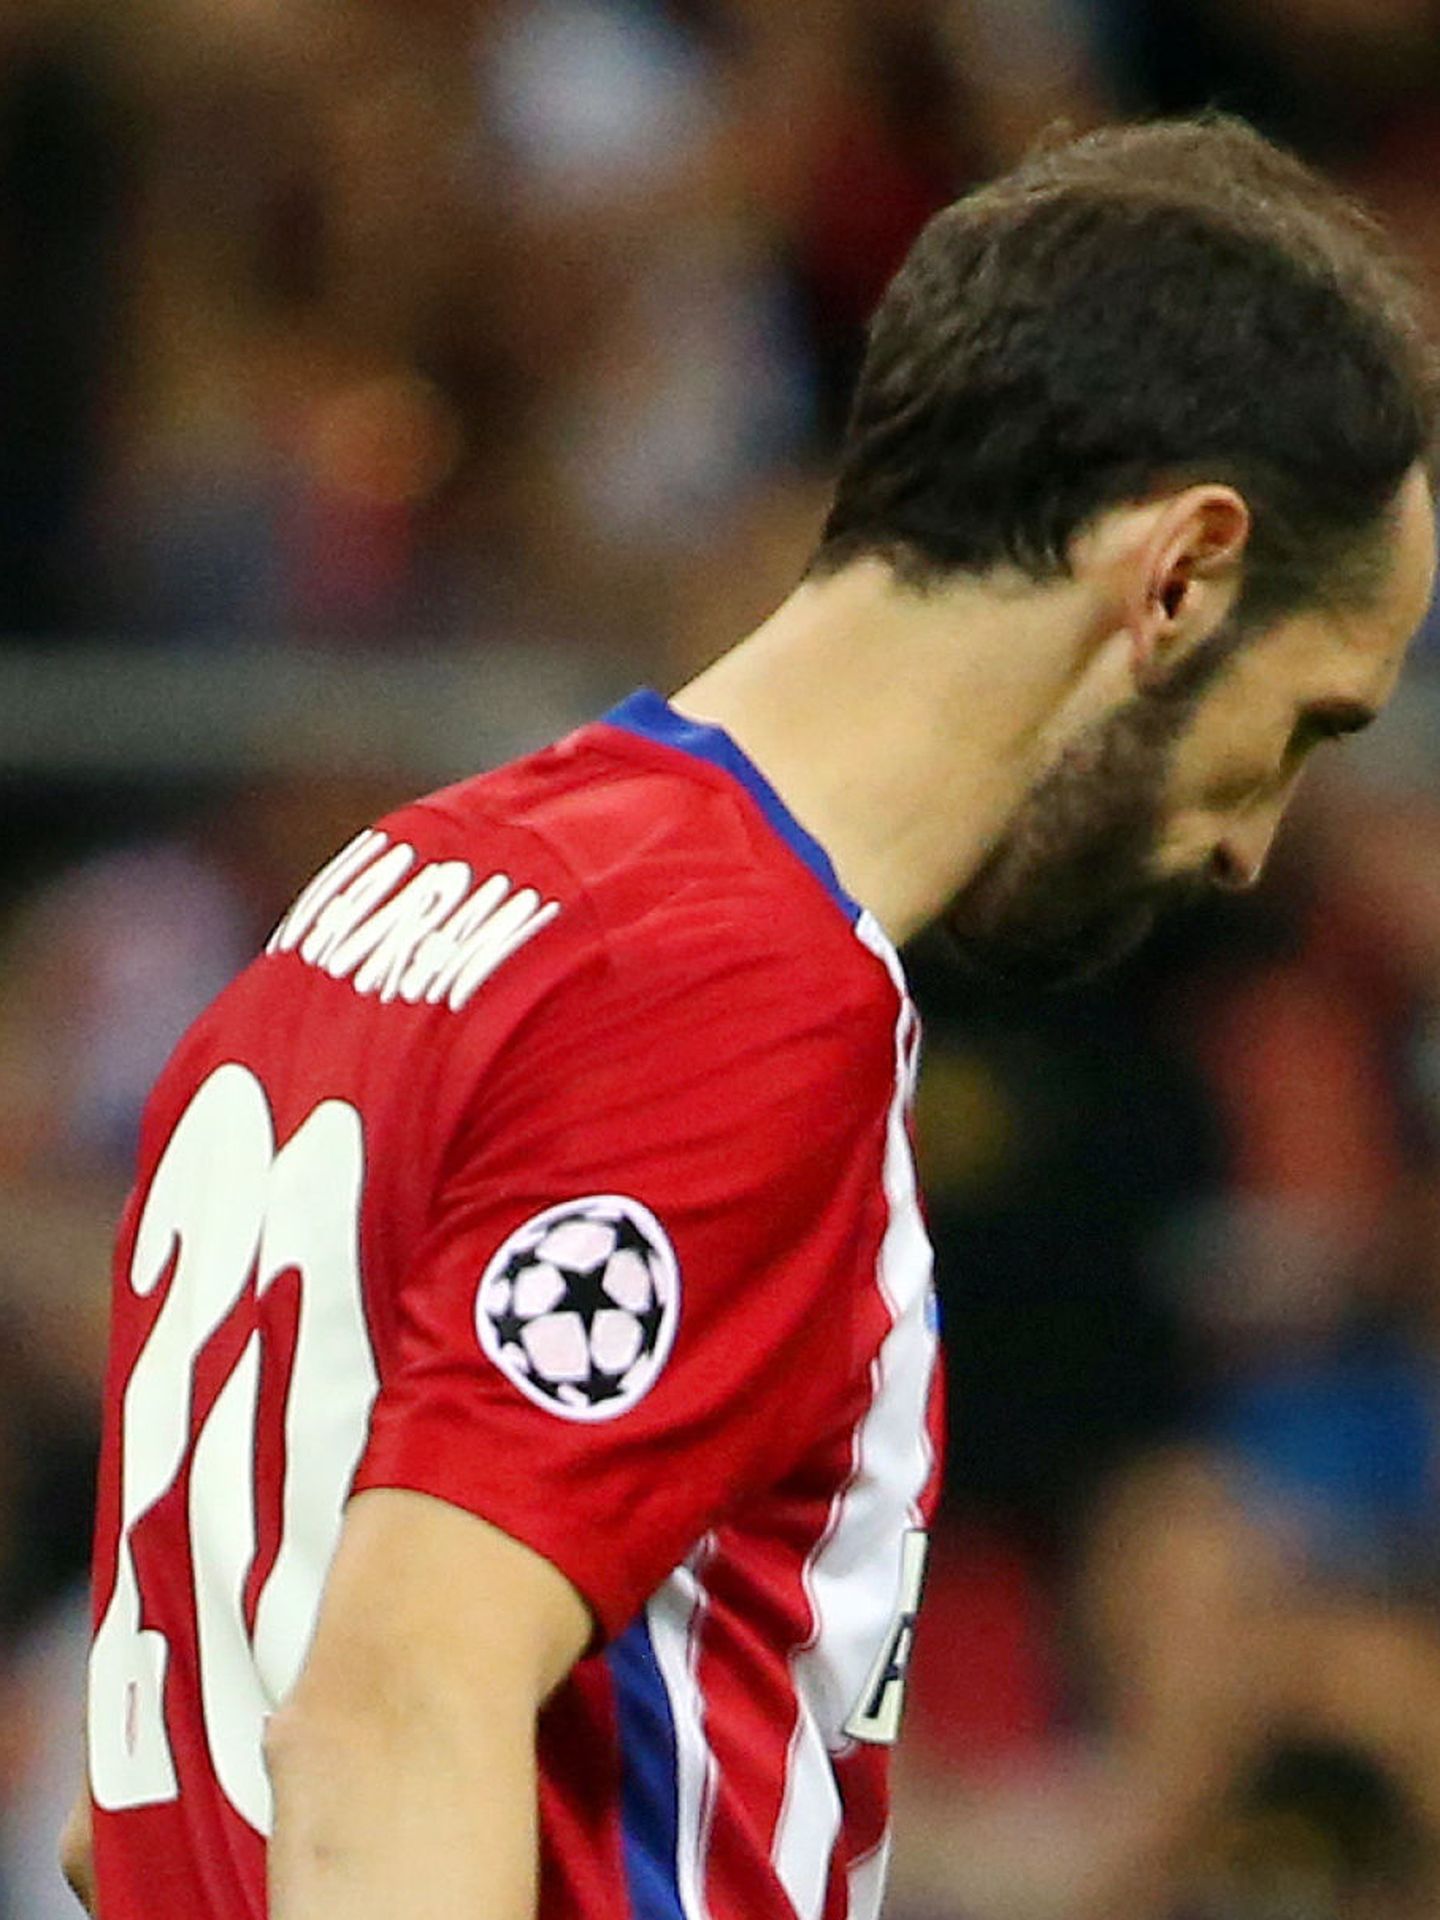 Soccer Football - Atletico Madrid v Real Madrid - UEFA Champions League Final - San Siro Stadium, Milan, Italy - 28 5 16 Atletico Madrid's Juanfran looks dejected after missing during the penalty shootout Reuters   Stefano Rellandini Livepic EDITORIAL USE ONLY.